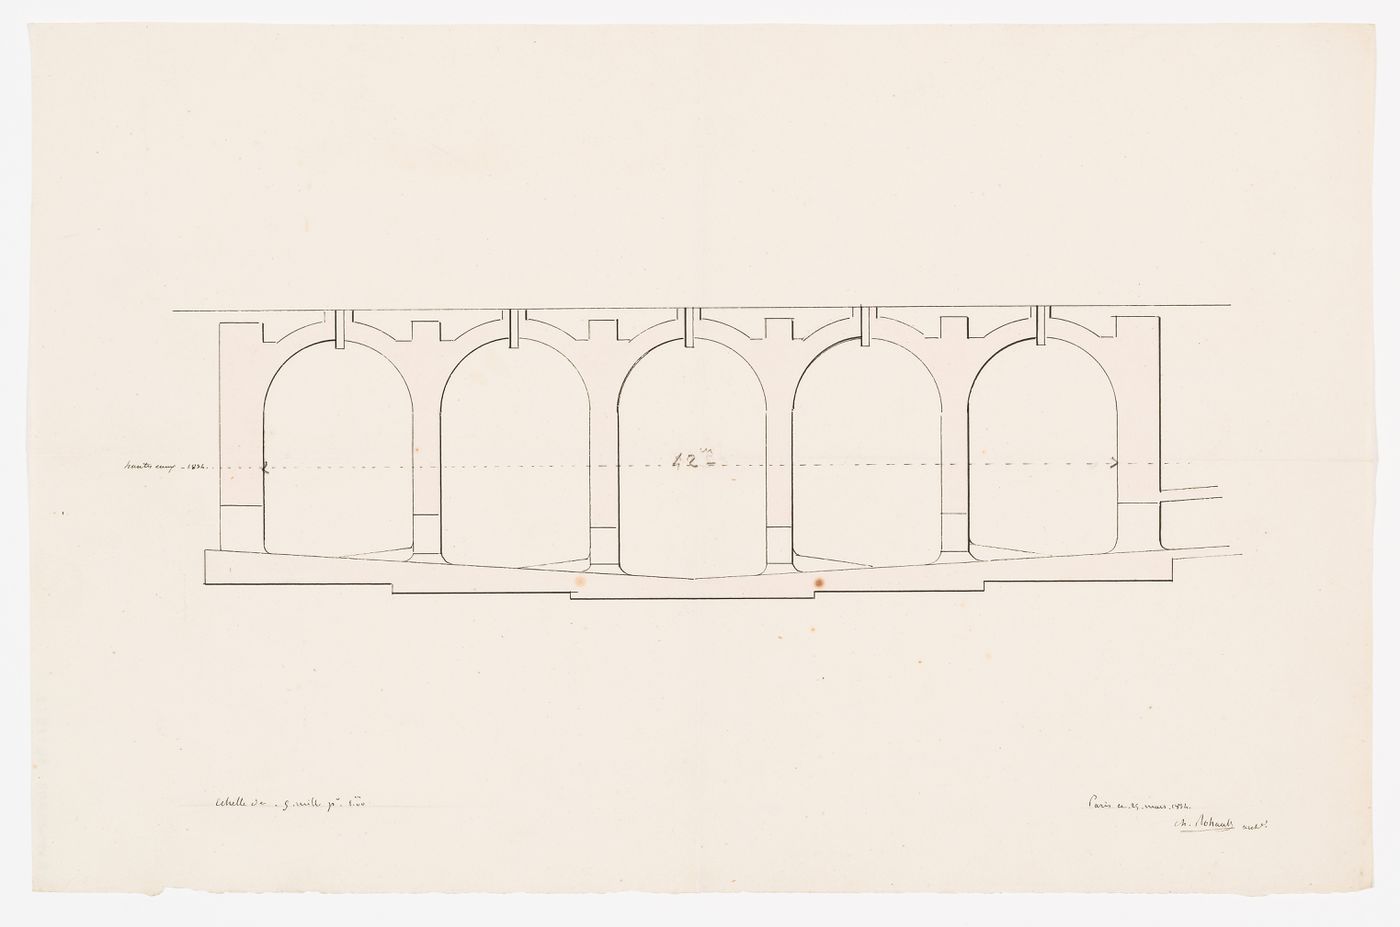 Section for a "soubassement" showing the water level in 1834